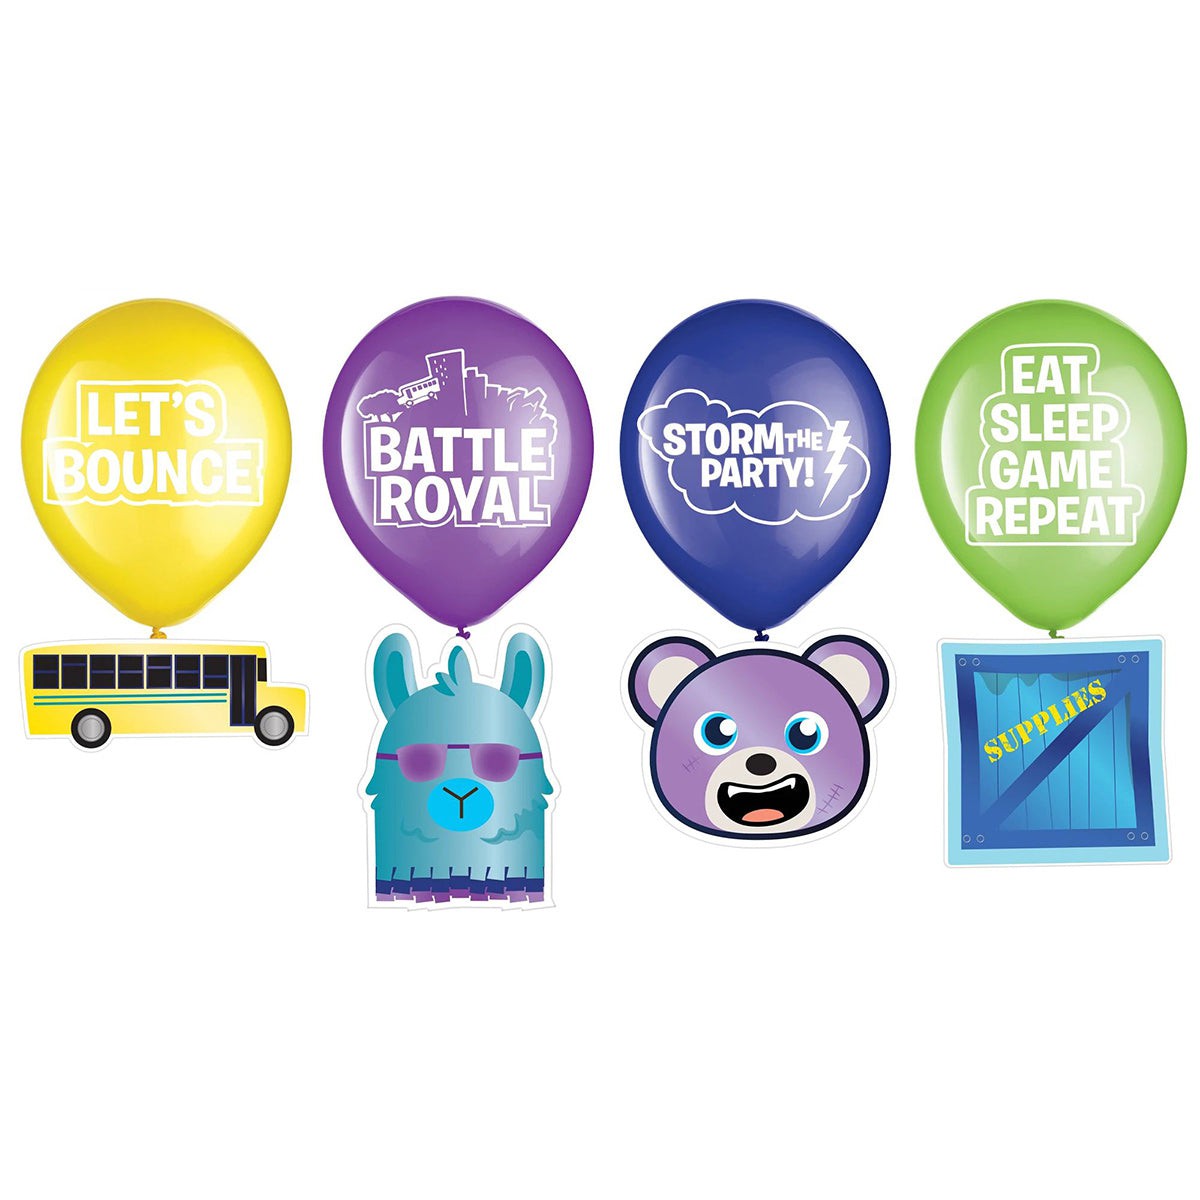 AMSCAN CA Kids Birthday Fornite Battle Royal Latex Balloon with Cutouts, 12 Inches, 6 Count 192937327319